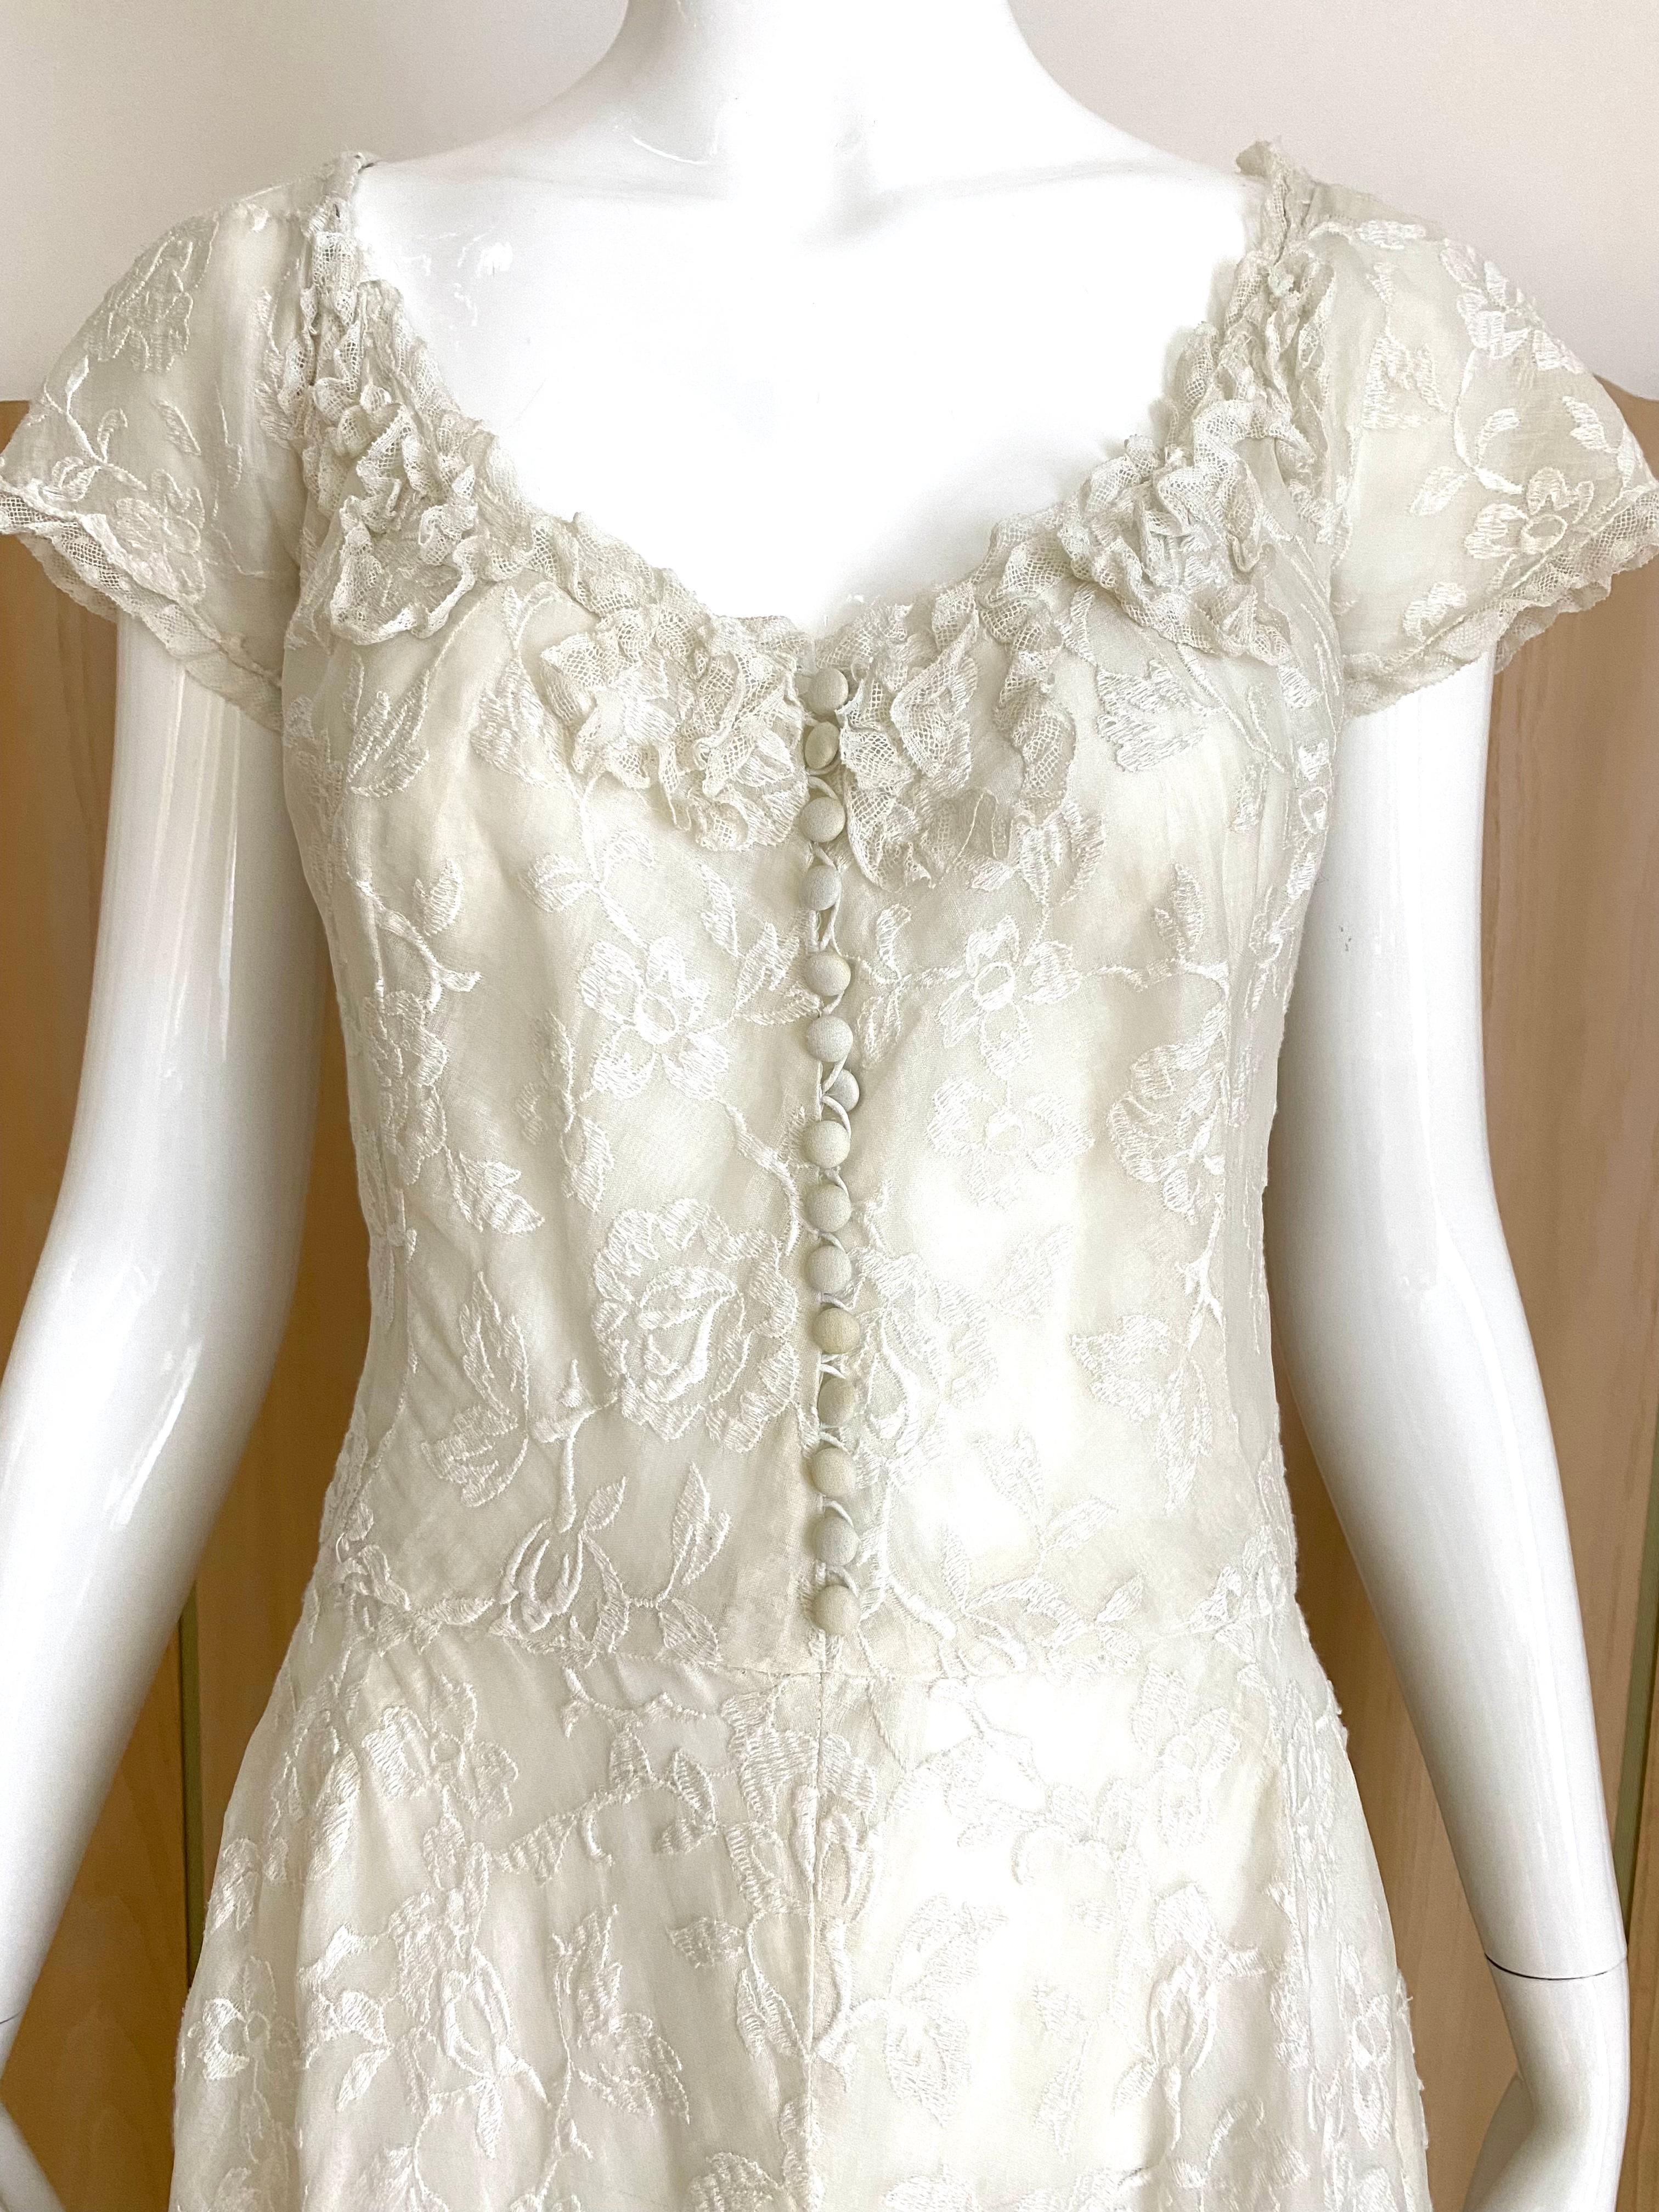 Late 1930s to early 1940s White Cotton embroidered summer wedding dress.
 Dress has horse hair crinoline to give fullness. 
Size: 4 - Small
Bust: 36” / Waist: 26” / Hip 40” / Dress length: 62”